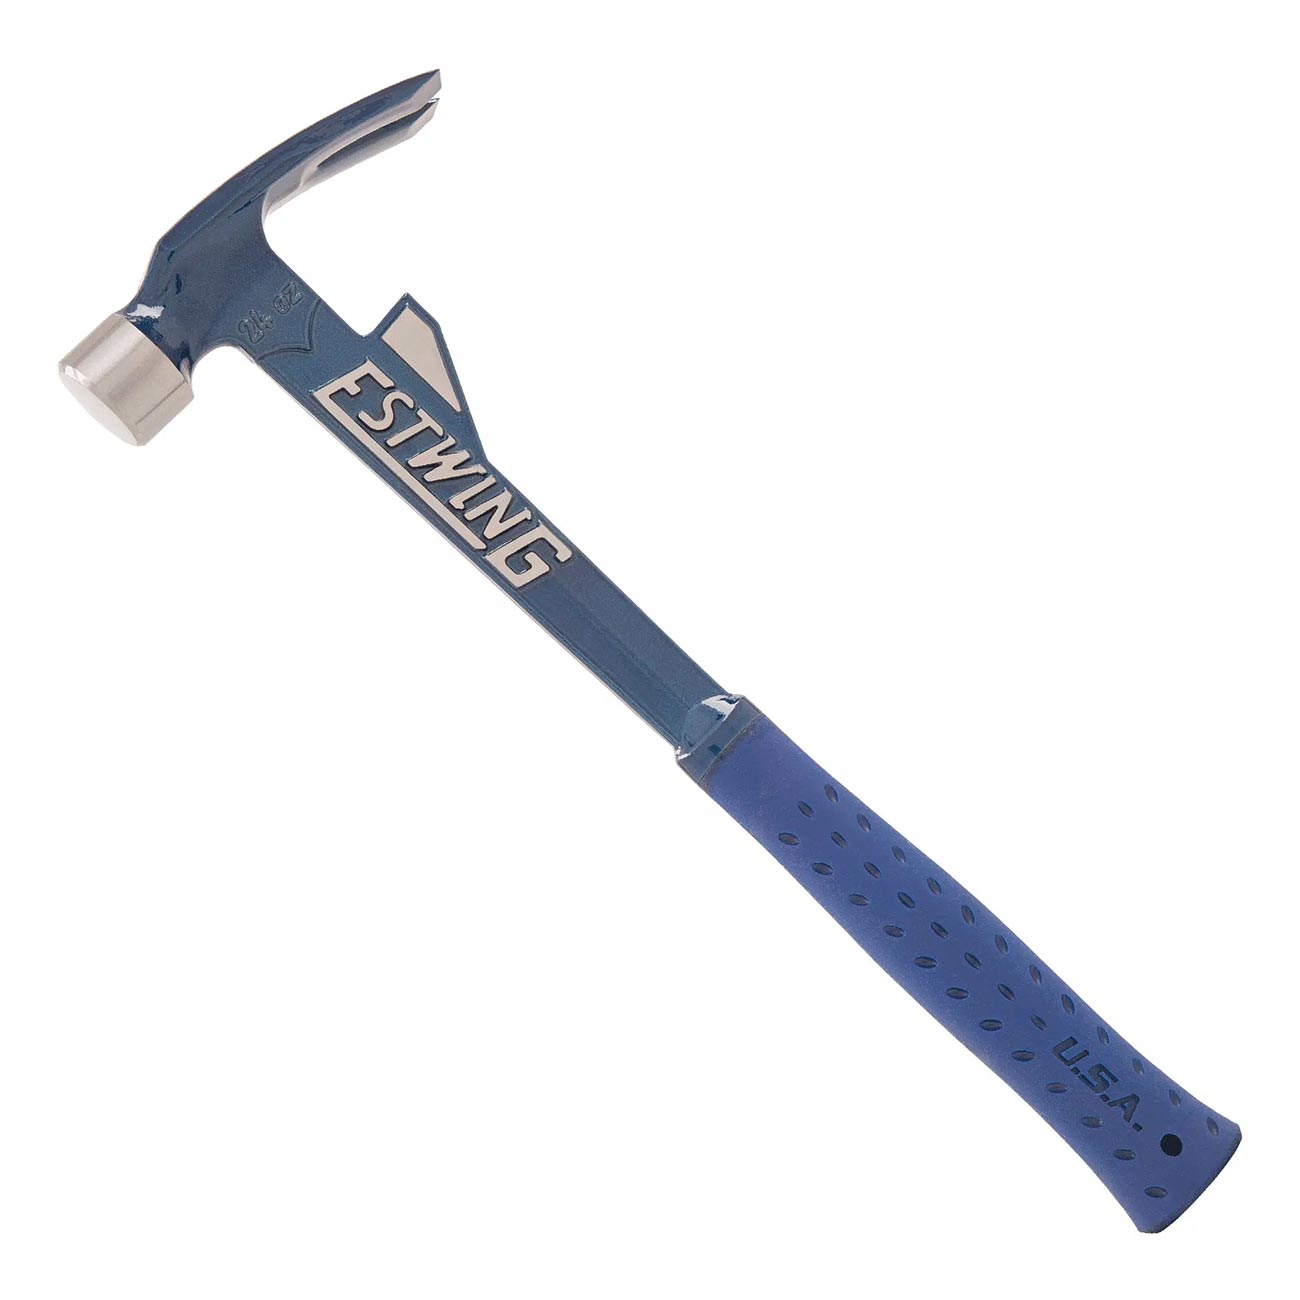 Estwing 24 oz. Smooth Face Hammertooth Hammer with Nylon-Vinyl Grip